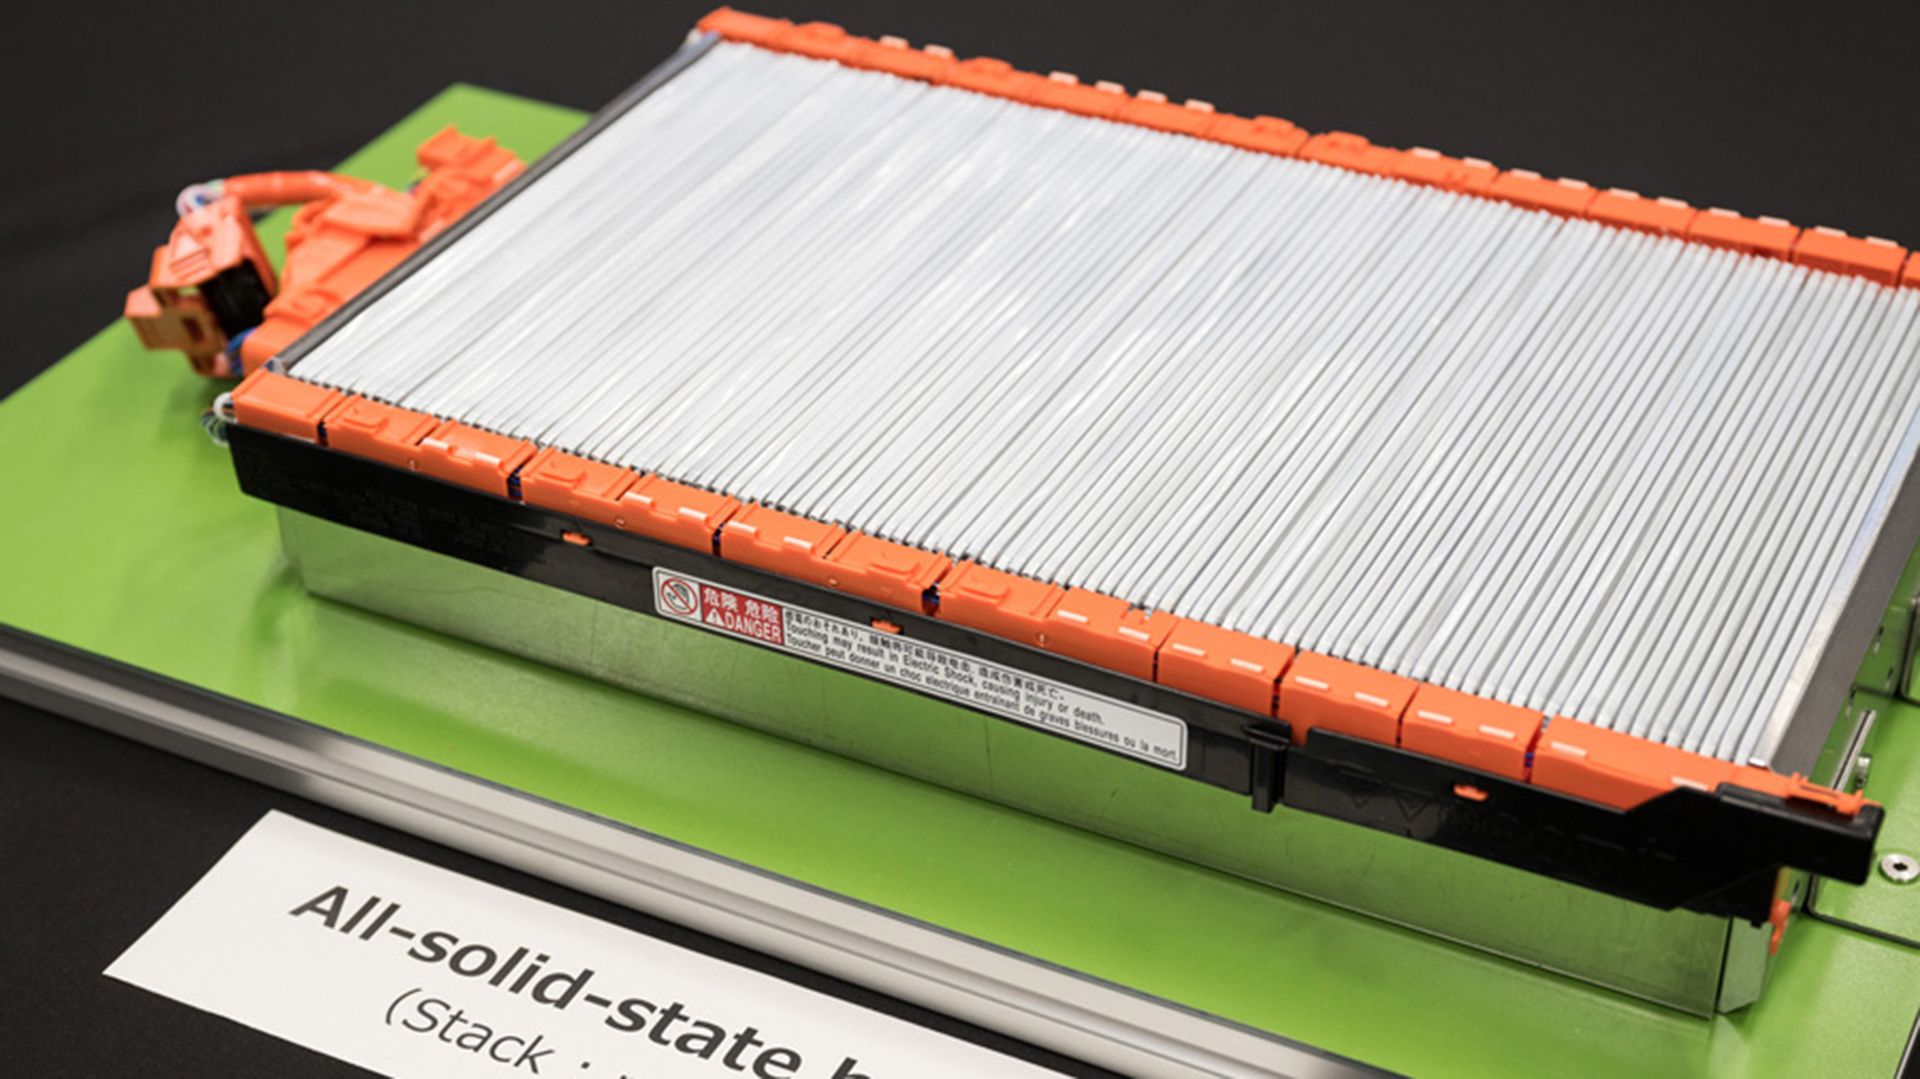 Toyota prototype solid-state EV battery stack on display